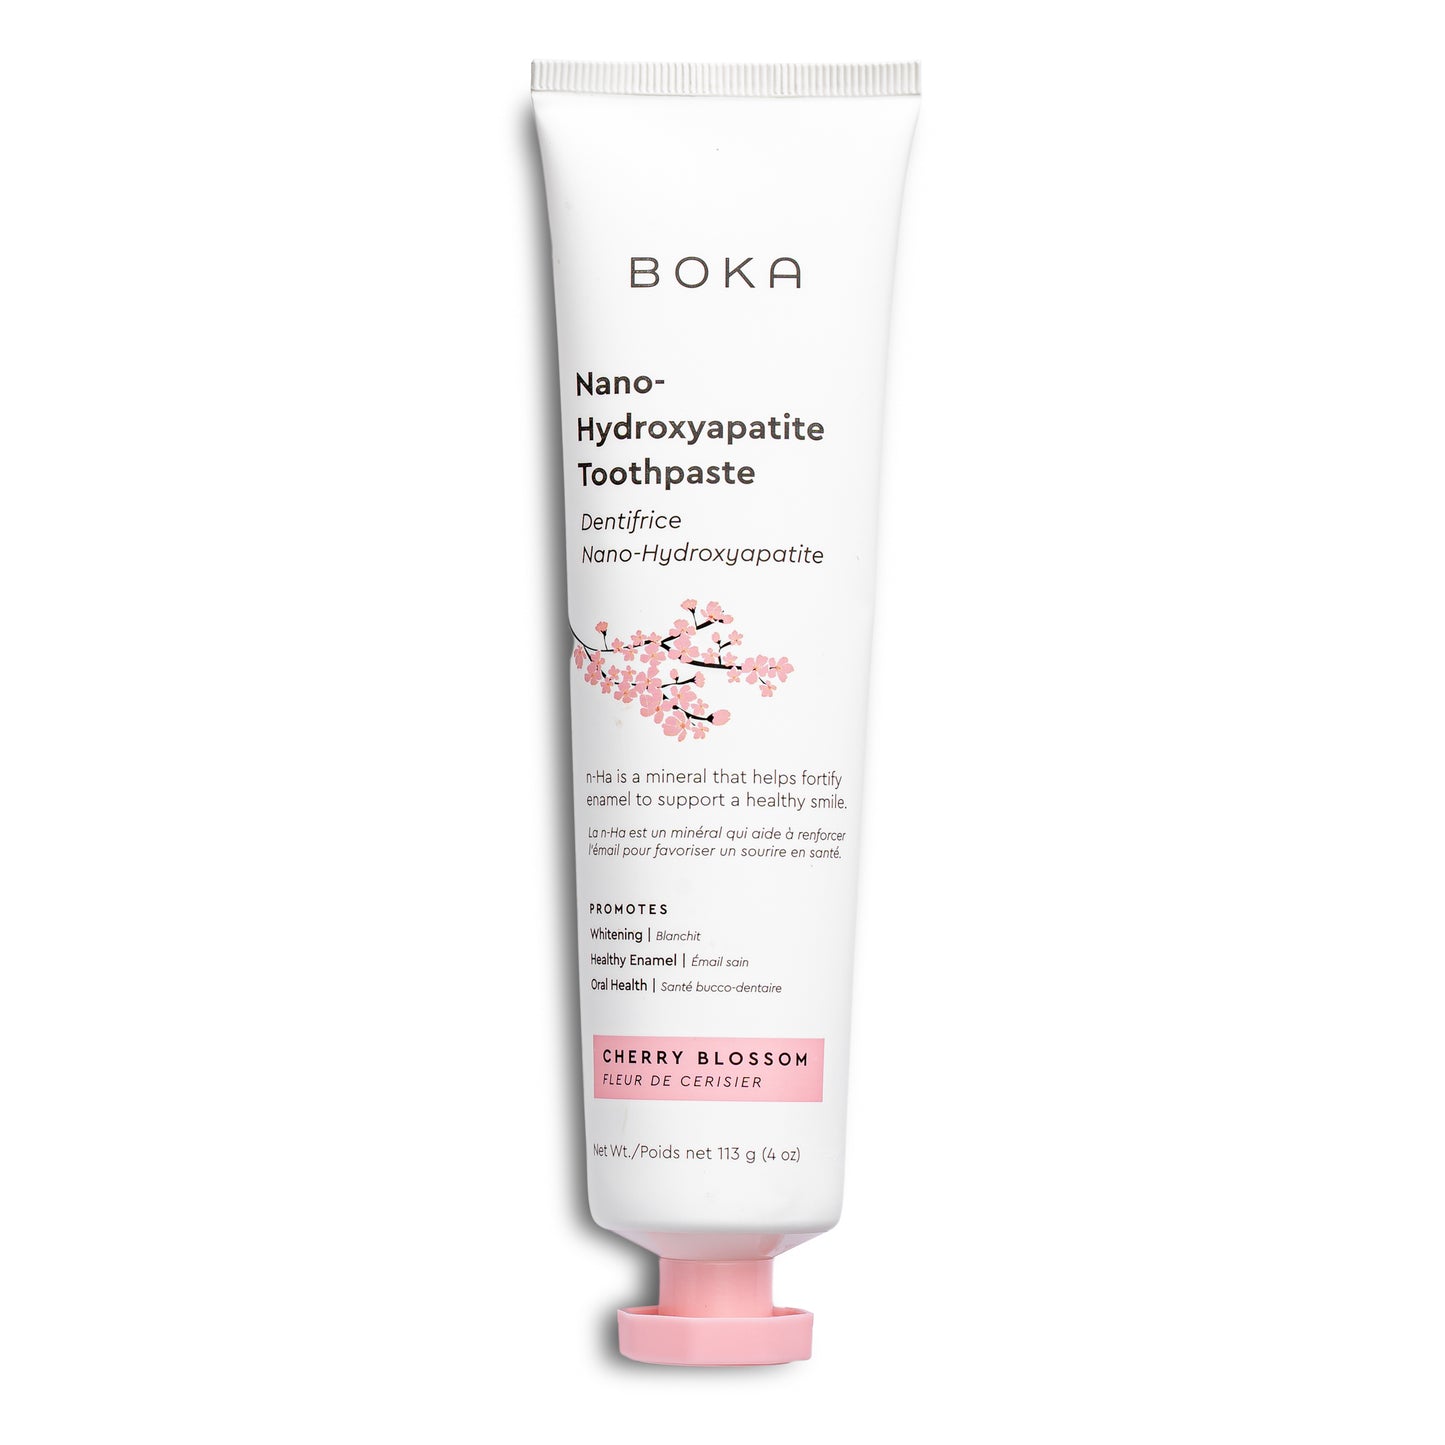 Cherry Blossom Cream Limited Edition Whitening n-Ha Toothpaste